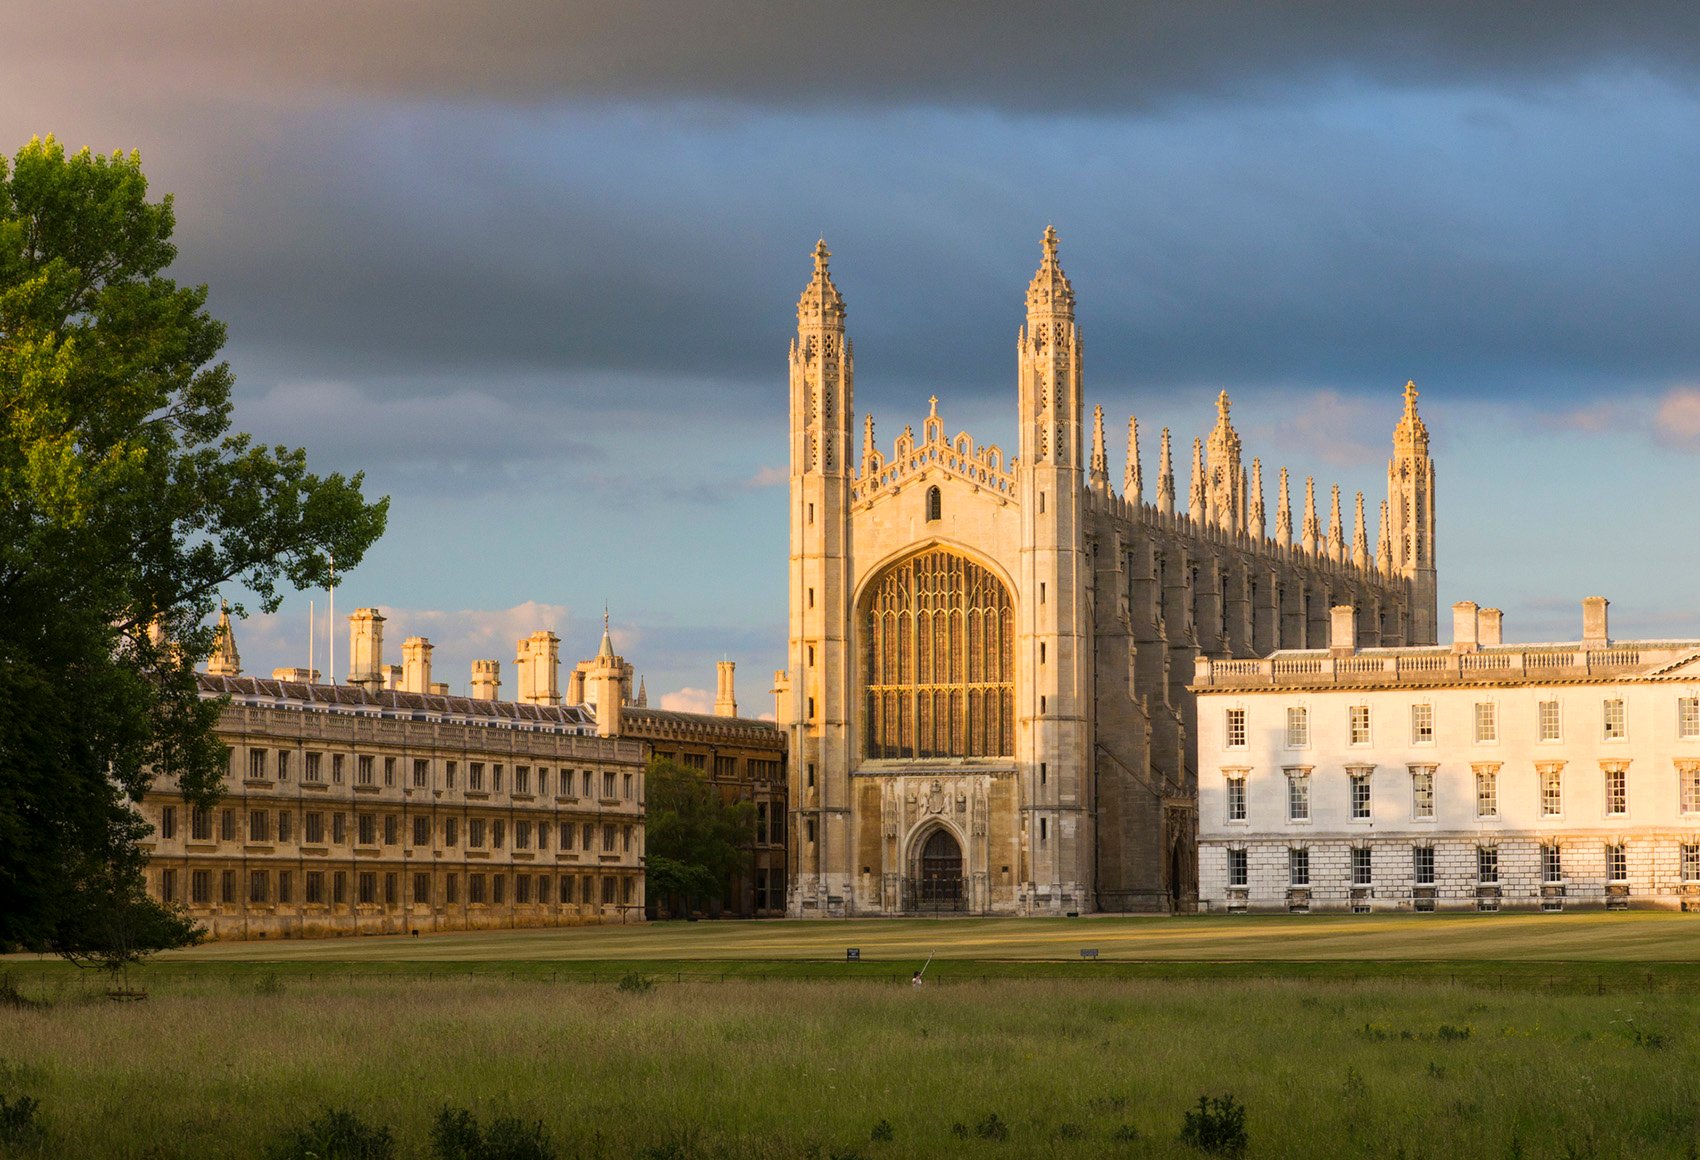 A view of King's College Chapel in Cambridge, England